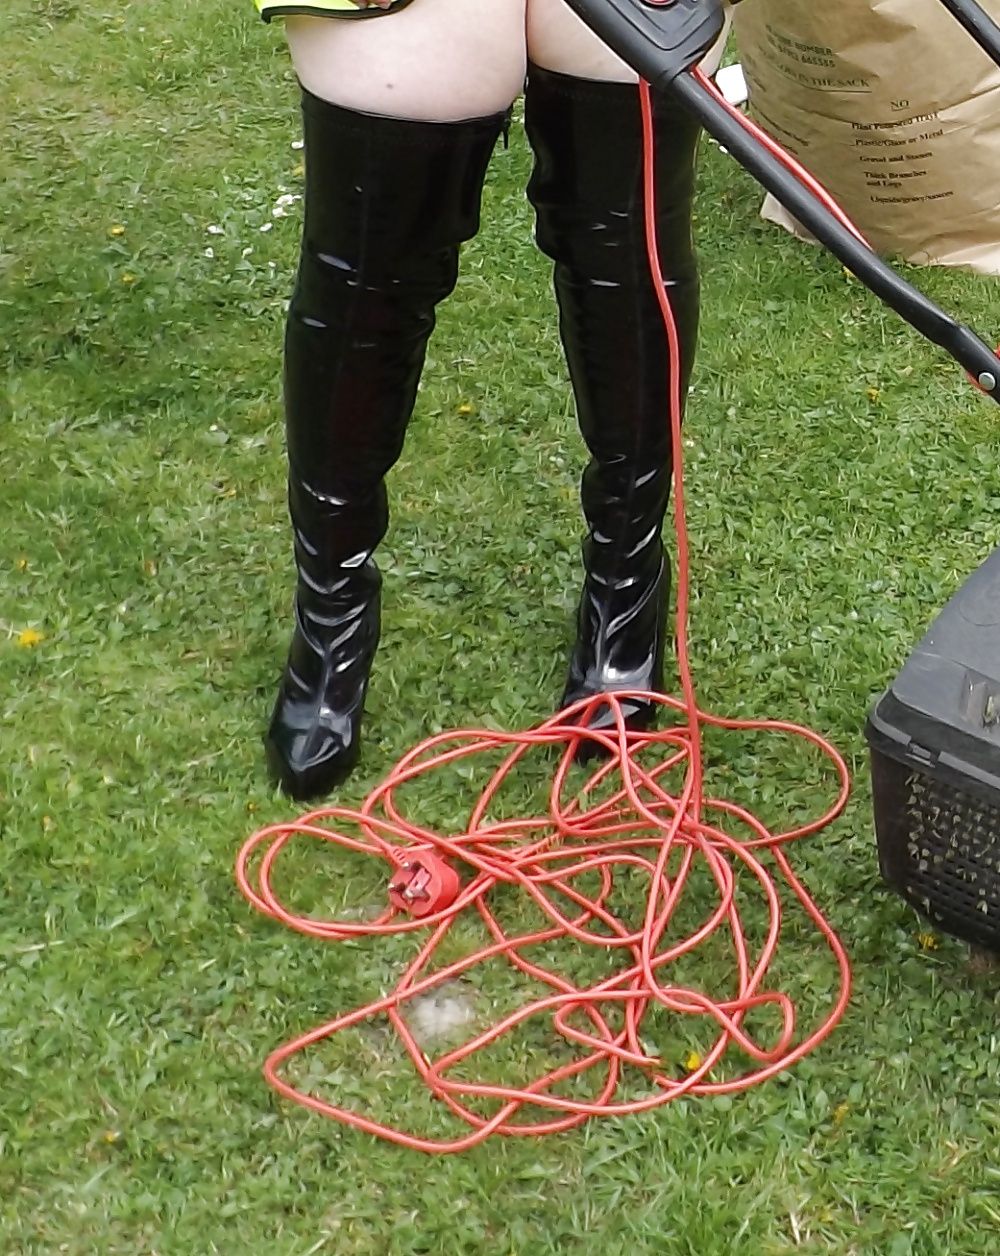 Mowing the lawn in PVC thigh boots #18903418